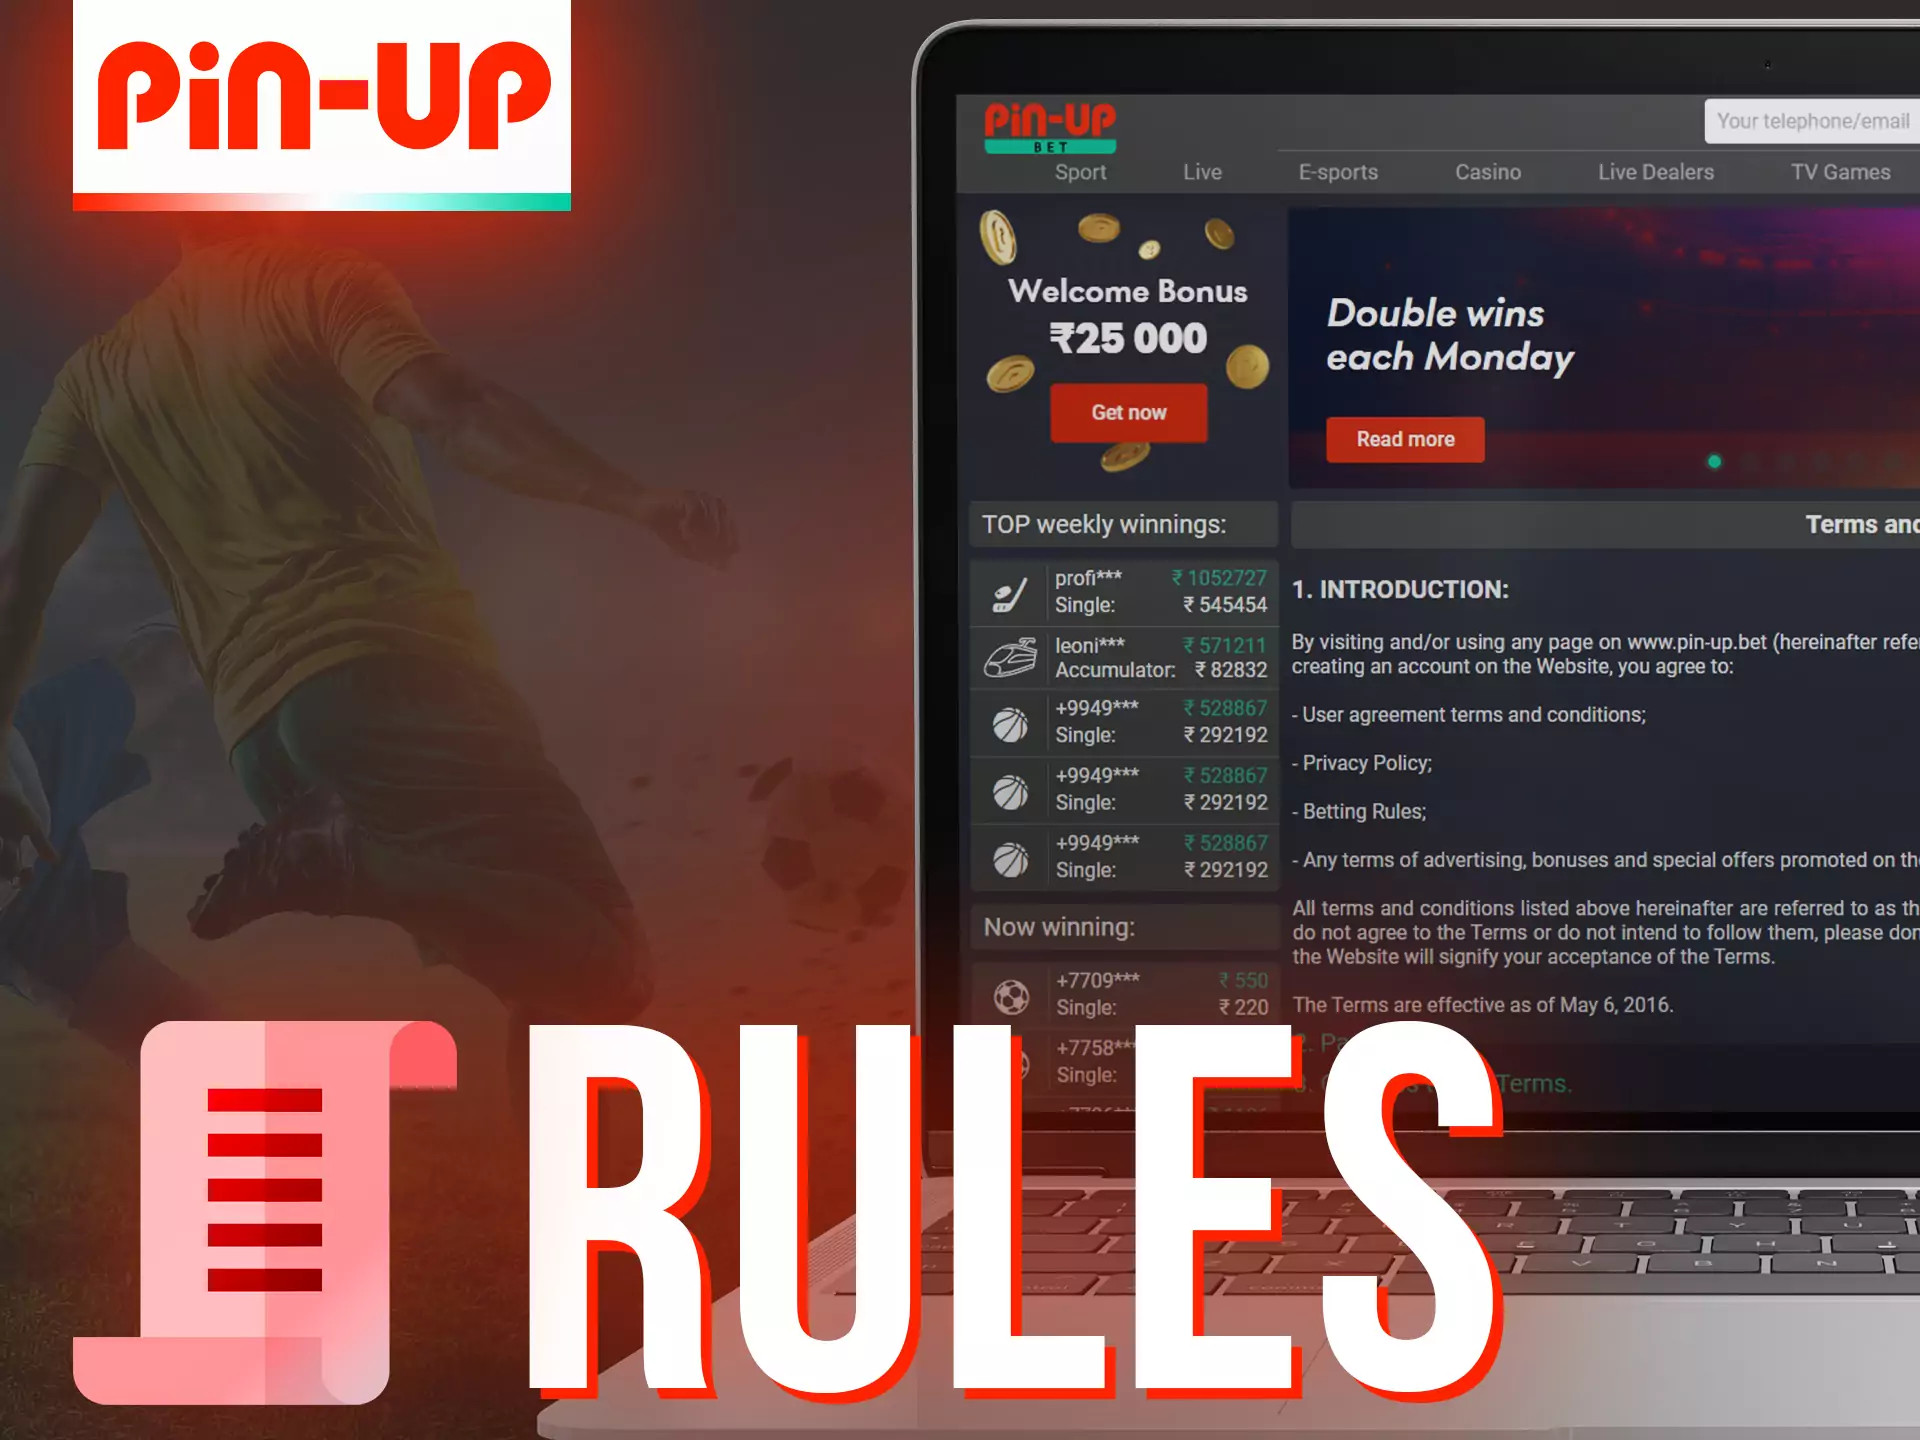 On Pin-up the rules are simple and clear, read them.